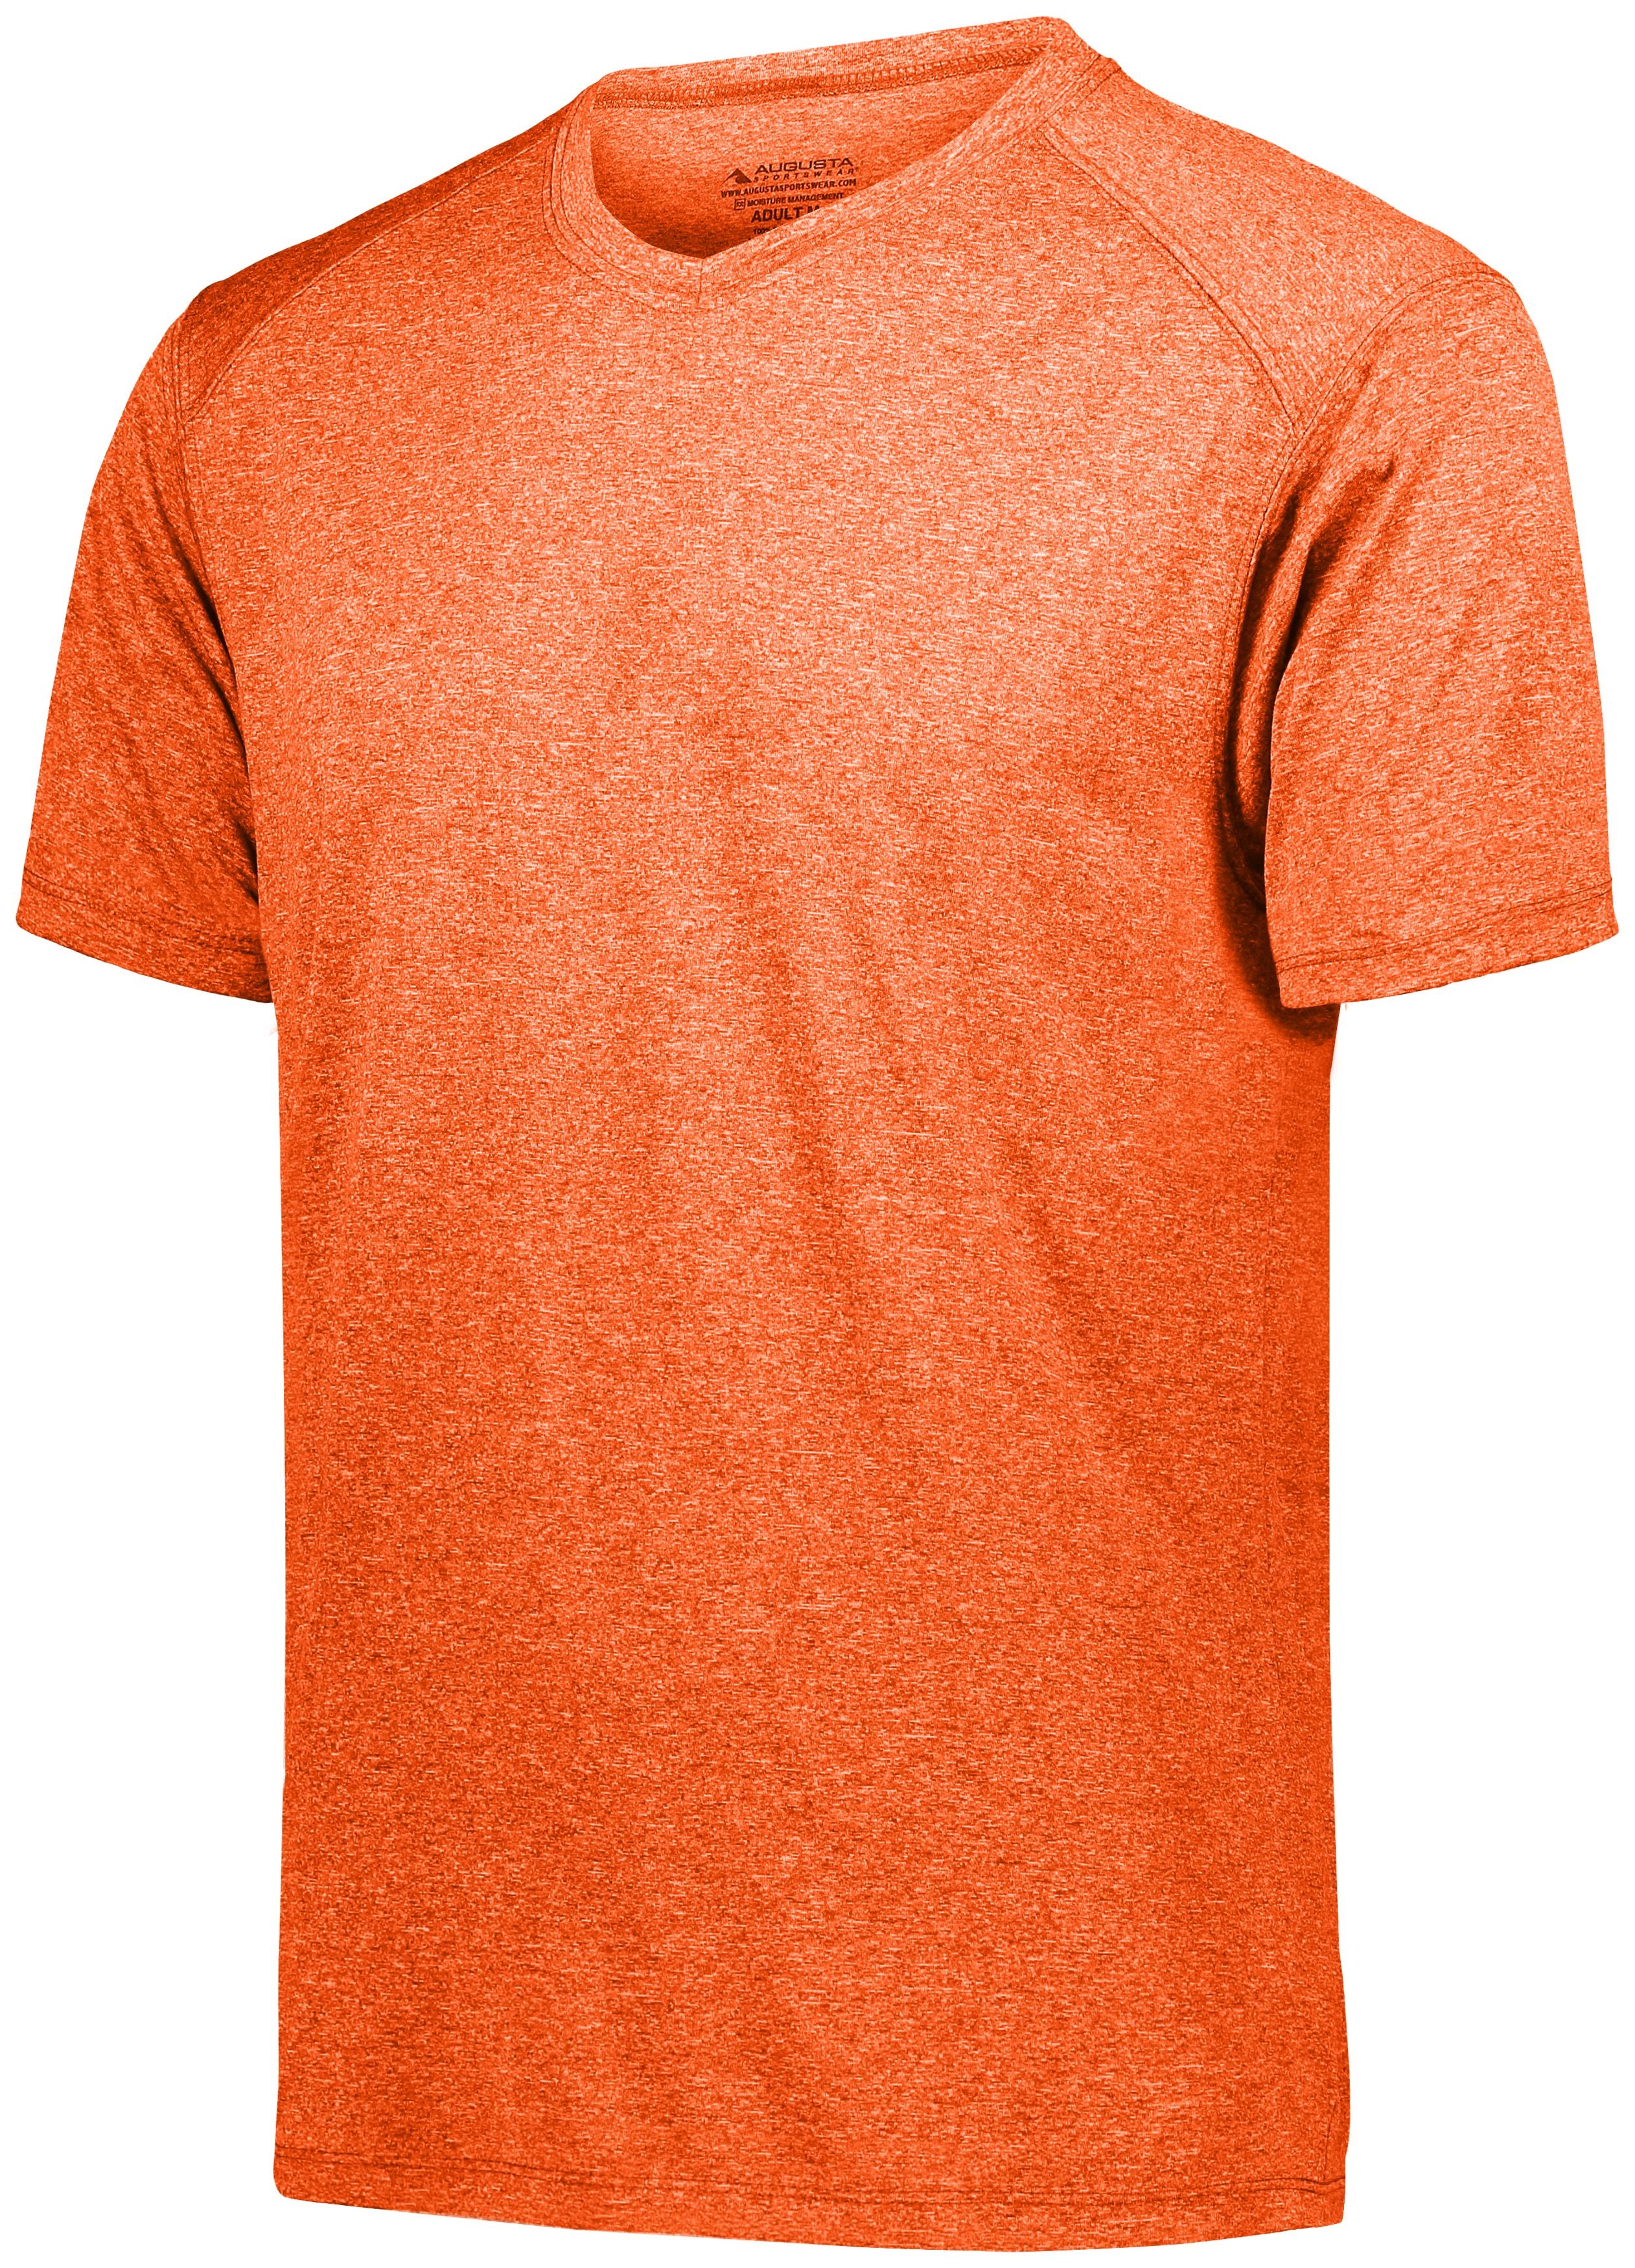 Augusta Sportswear Youth Kinergy Training Tee in Orange Heather  -Part of the Youth, Youth-Tee-Shirt, T-Shirts, Augusta-Products, Shirts product lines at KanaleyCreations.com